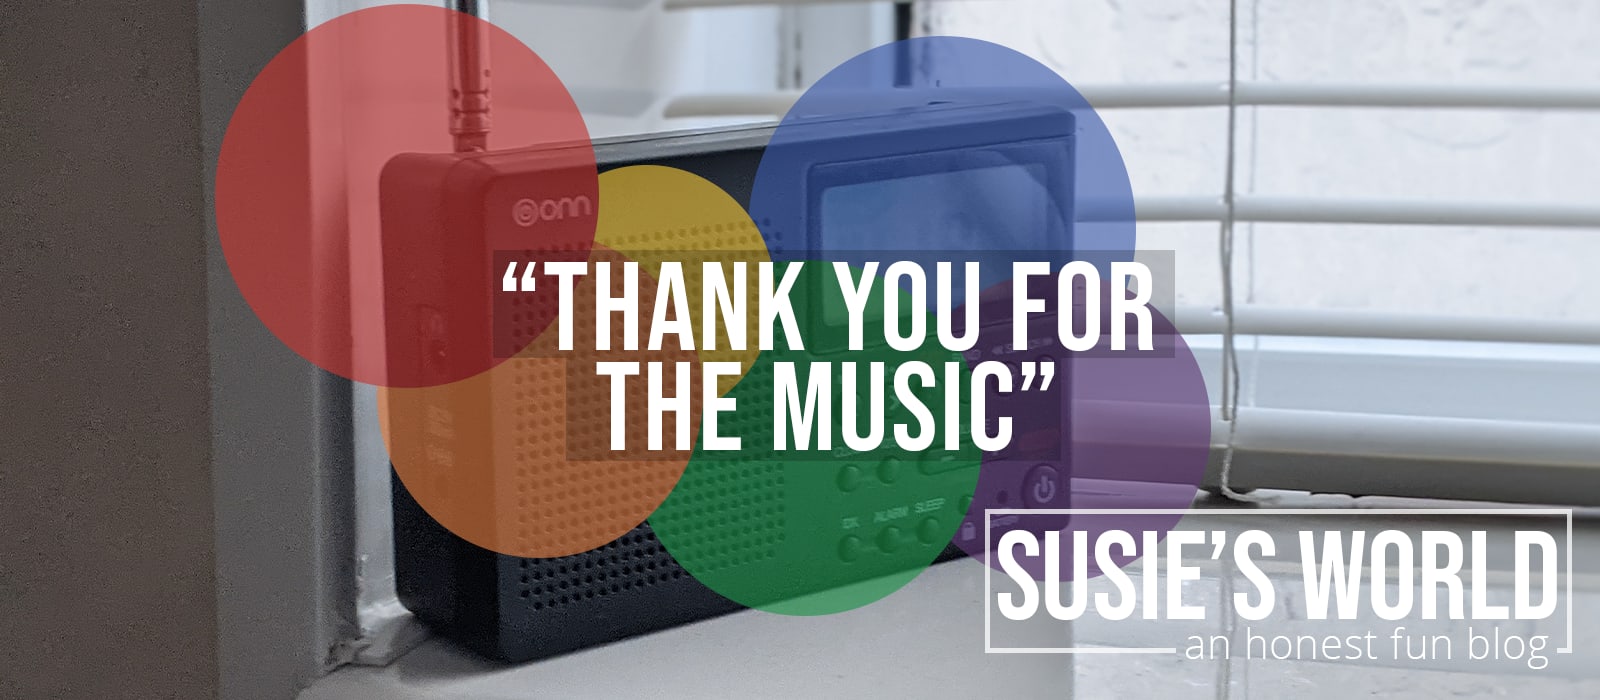 Thank you for the music!